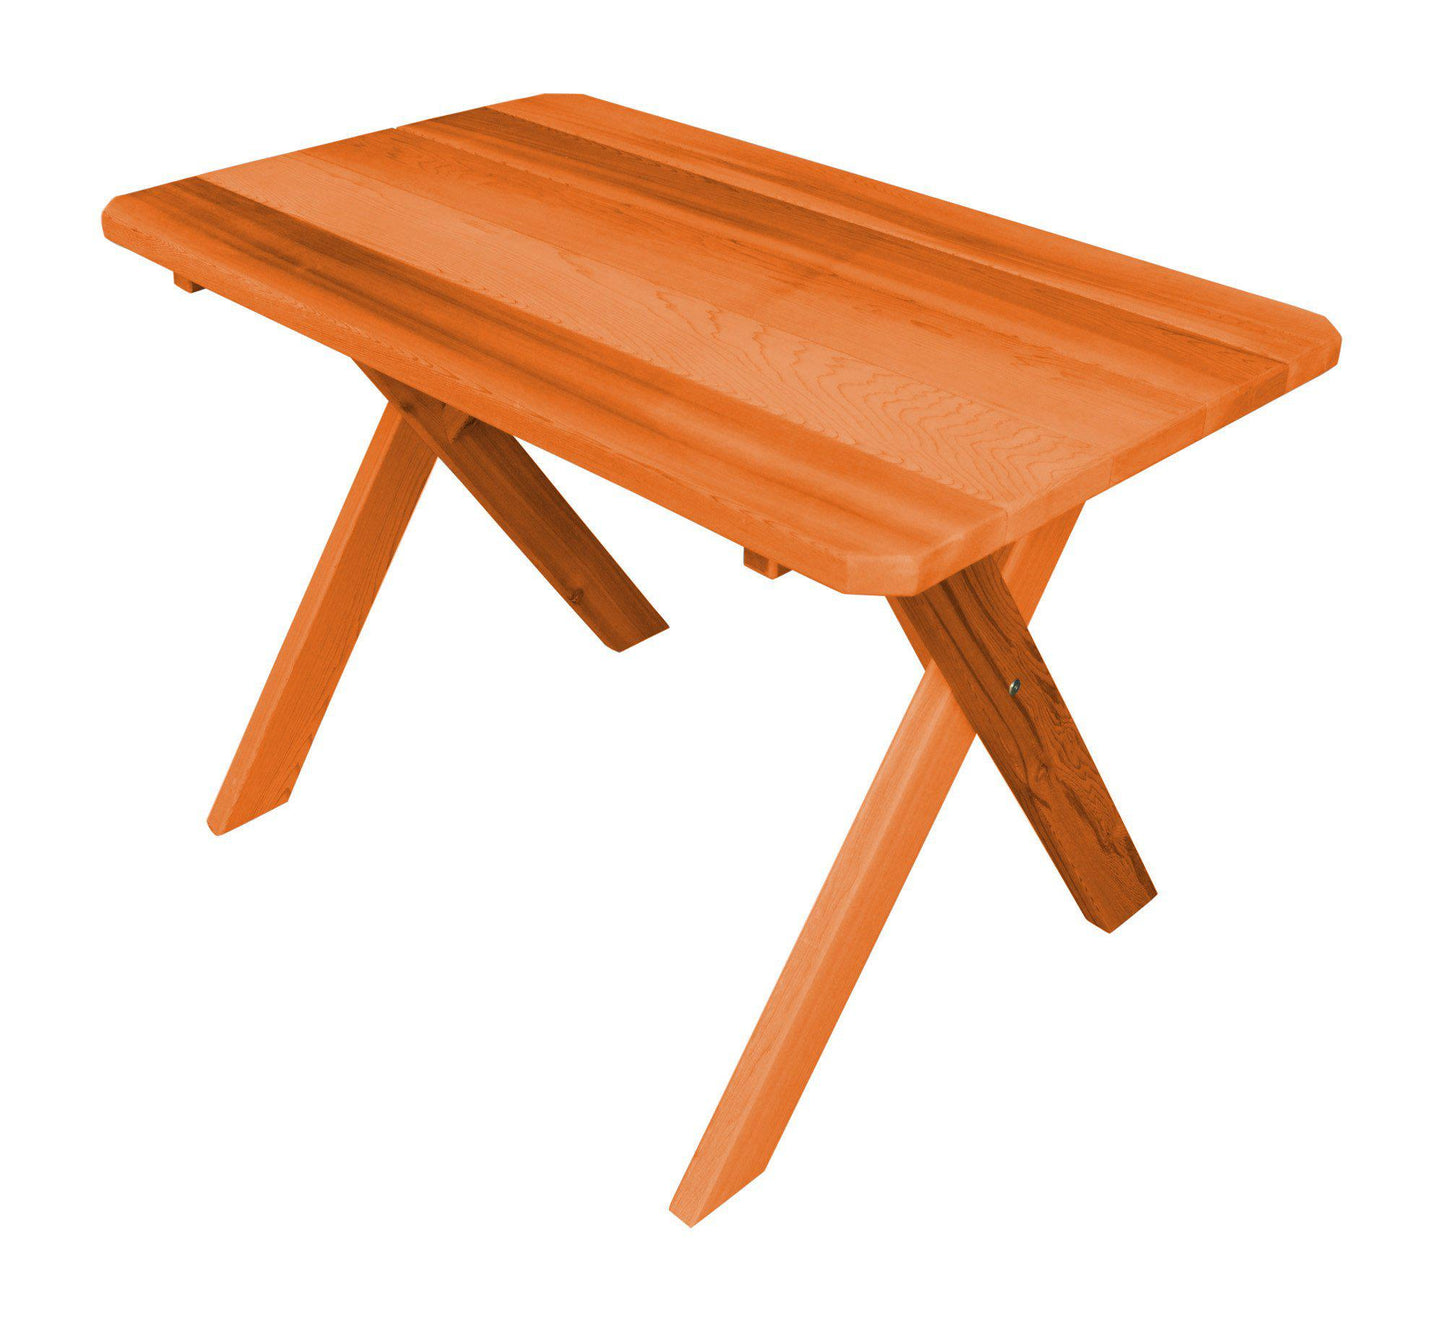 A&L FURNITURE CO. Western Red Cedar 44" Cross-leg Table Only - Specify for FREE 2" Umbrella Hole - LEAD TIME TO SHIP 4 WEEKS OR LESS